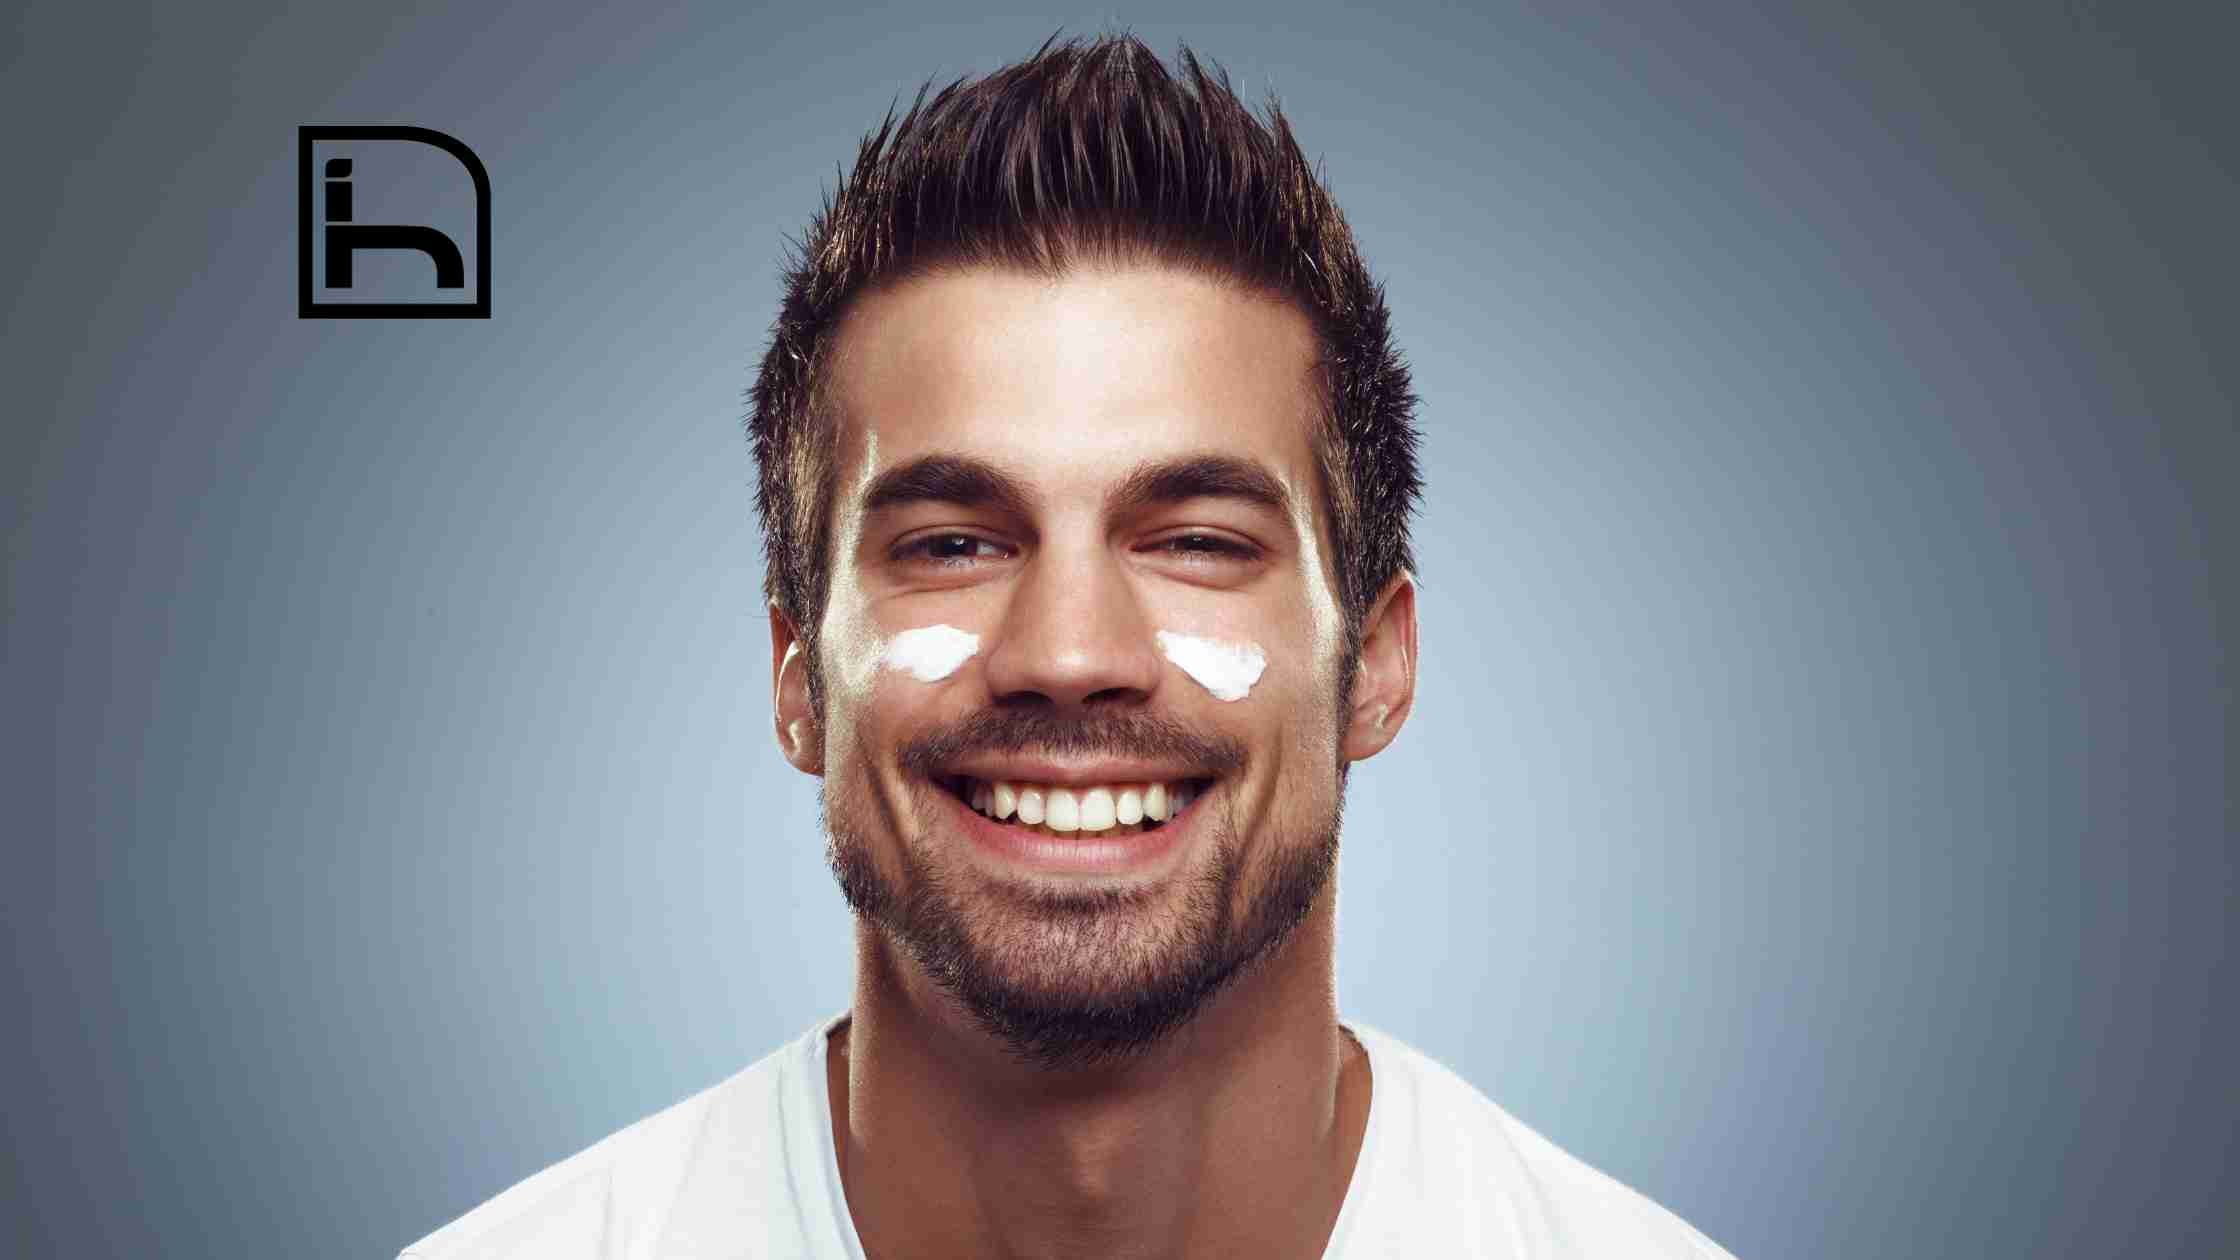 How to integrate anti-wrinkle cream into a man's facial care routine